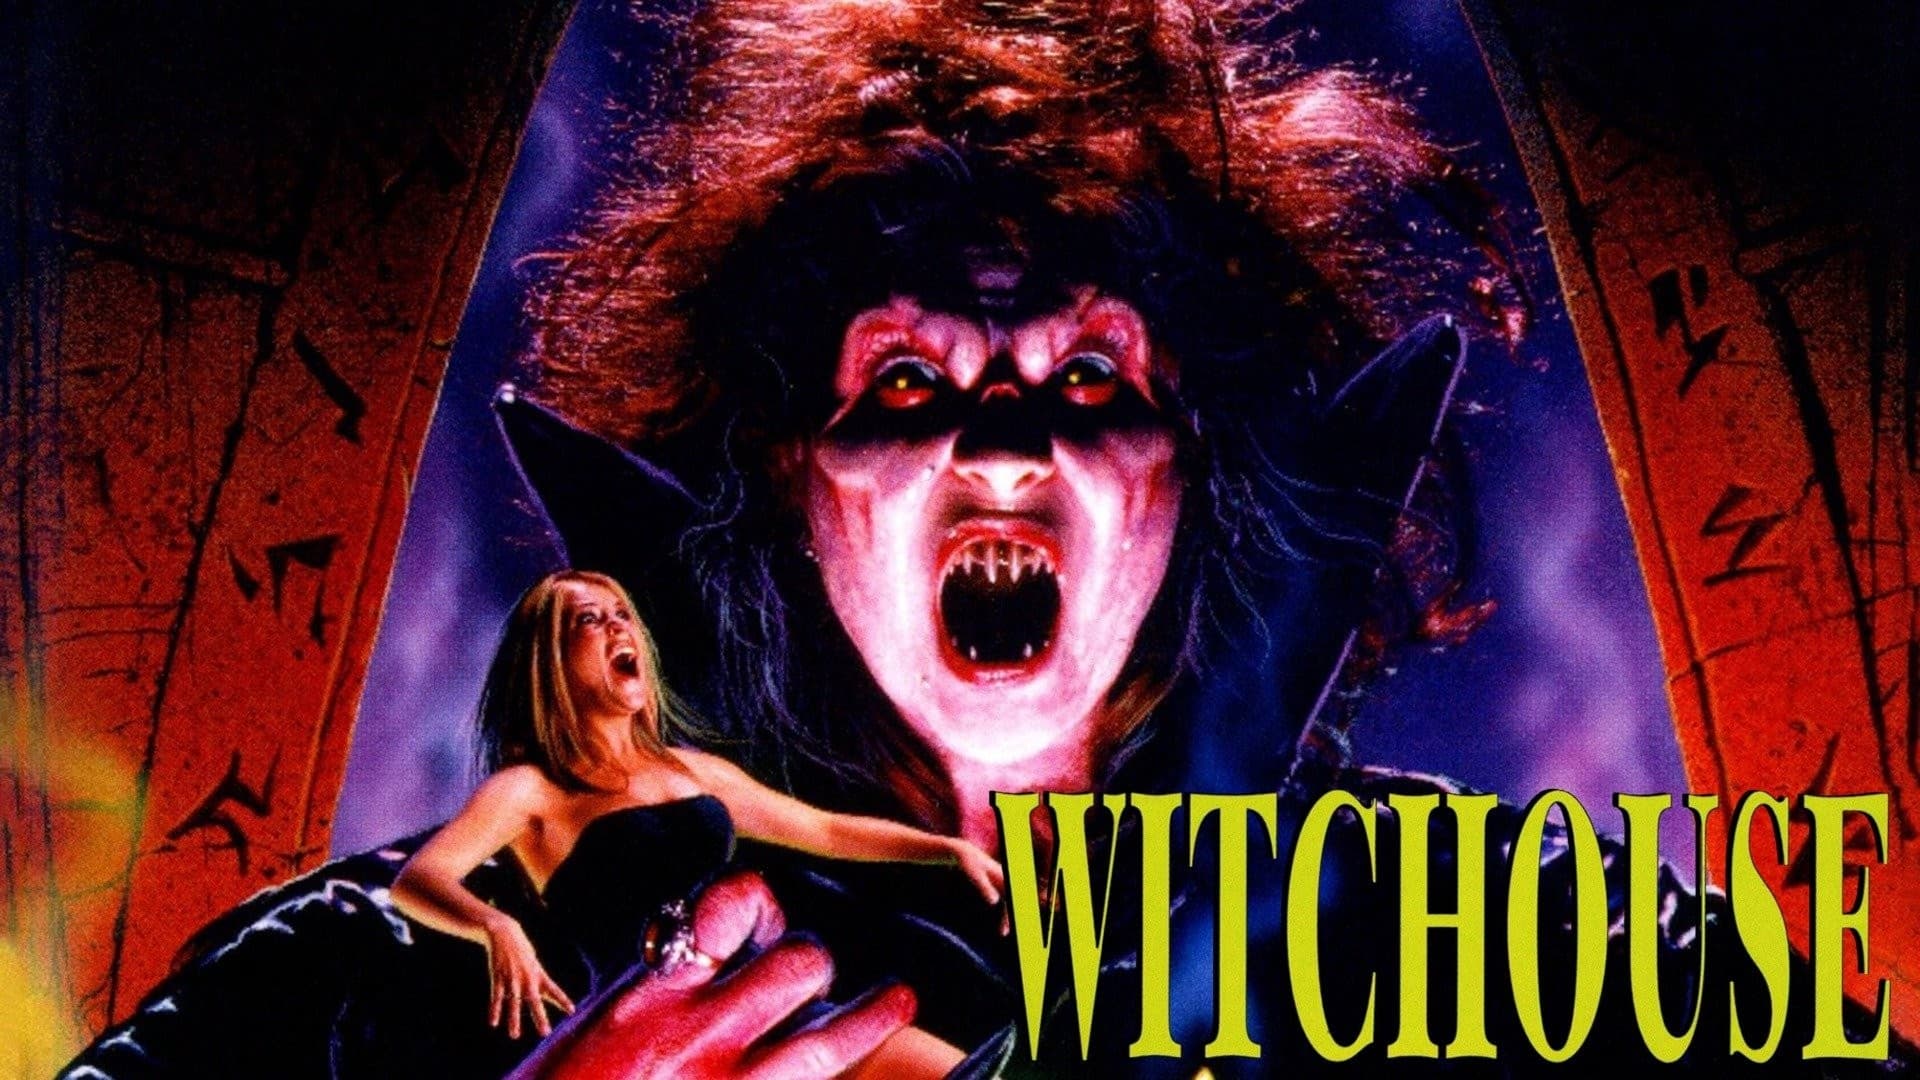 Witchouse (1999)